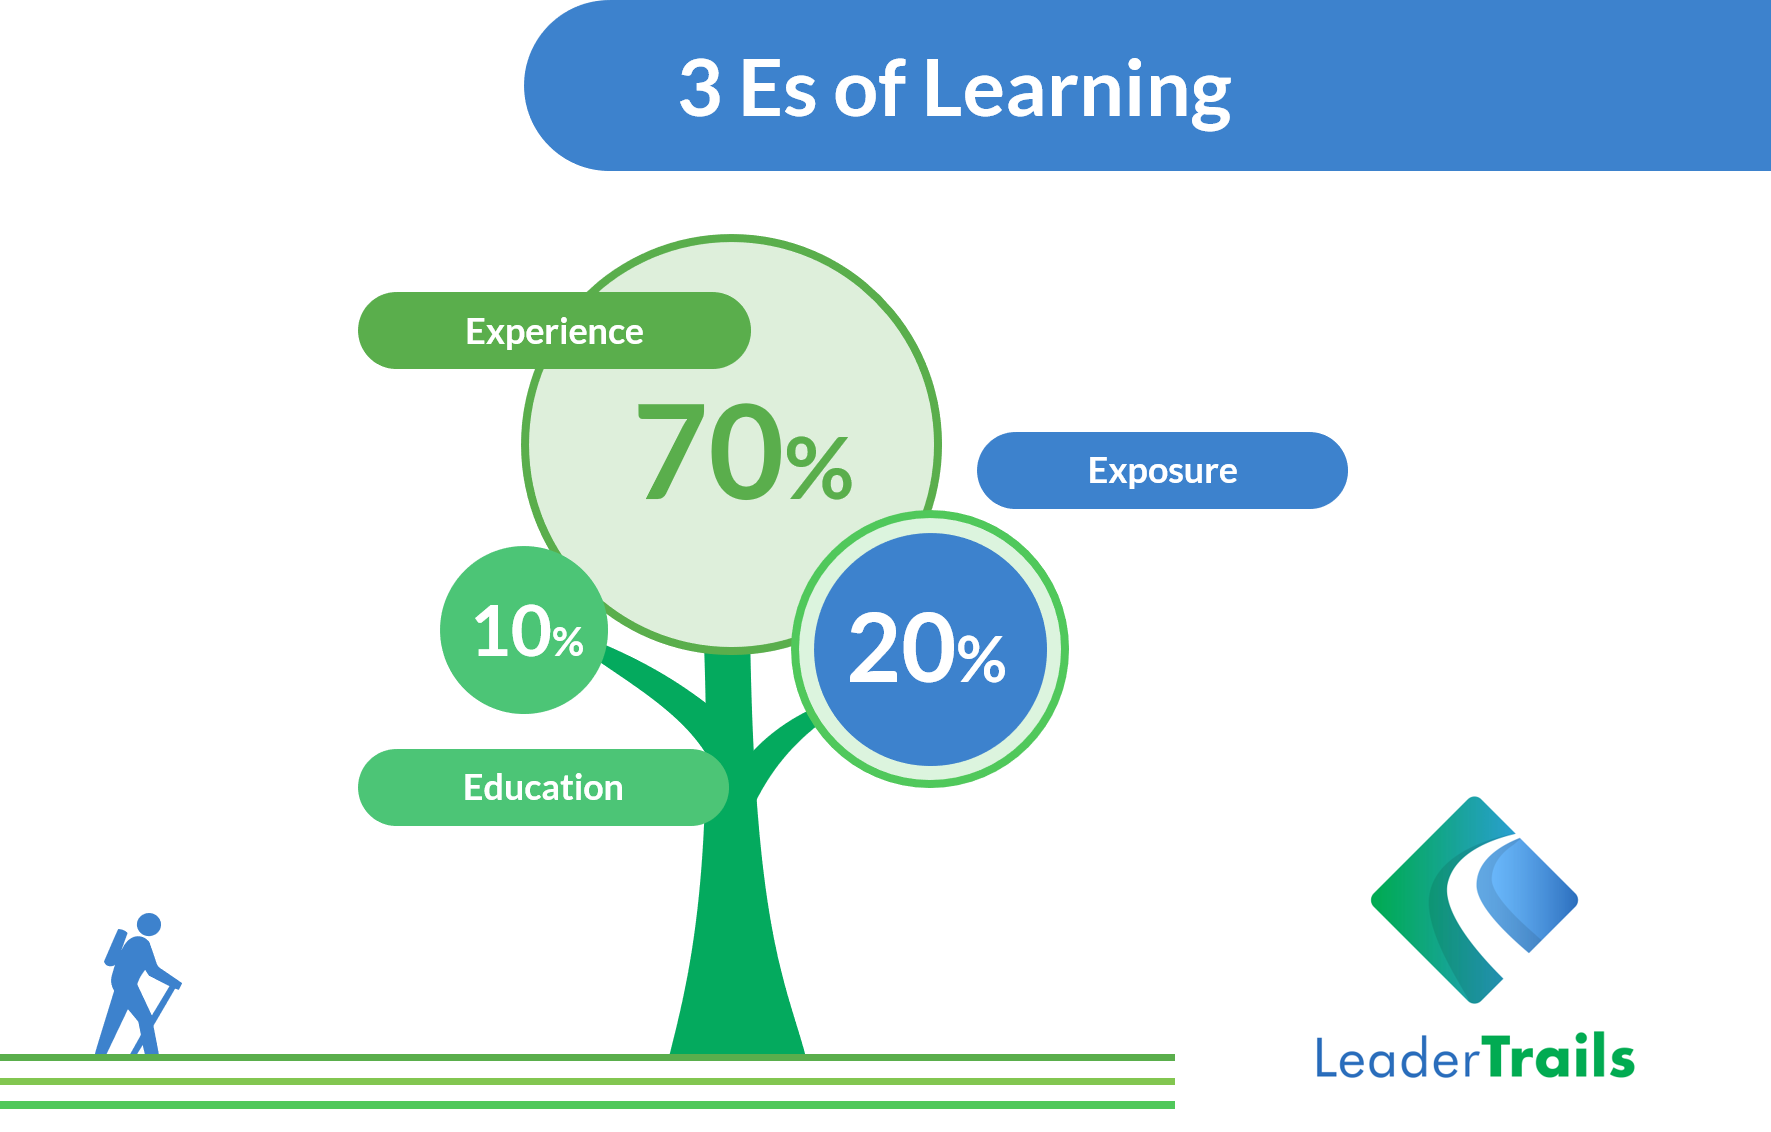 3E of Learning and Development